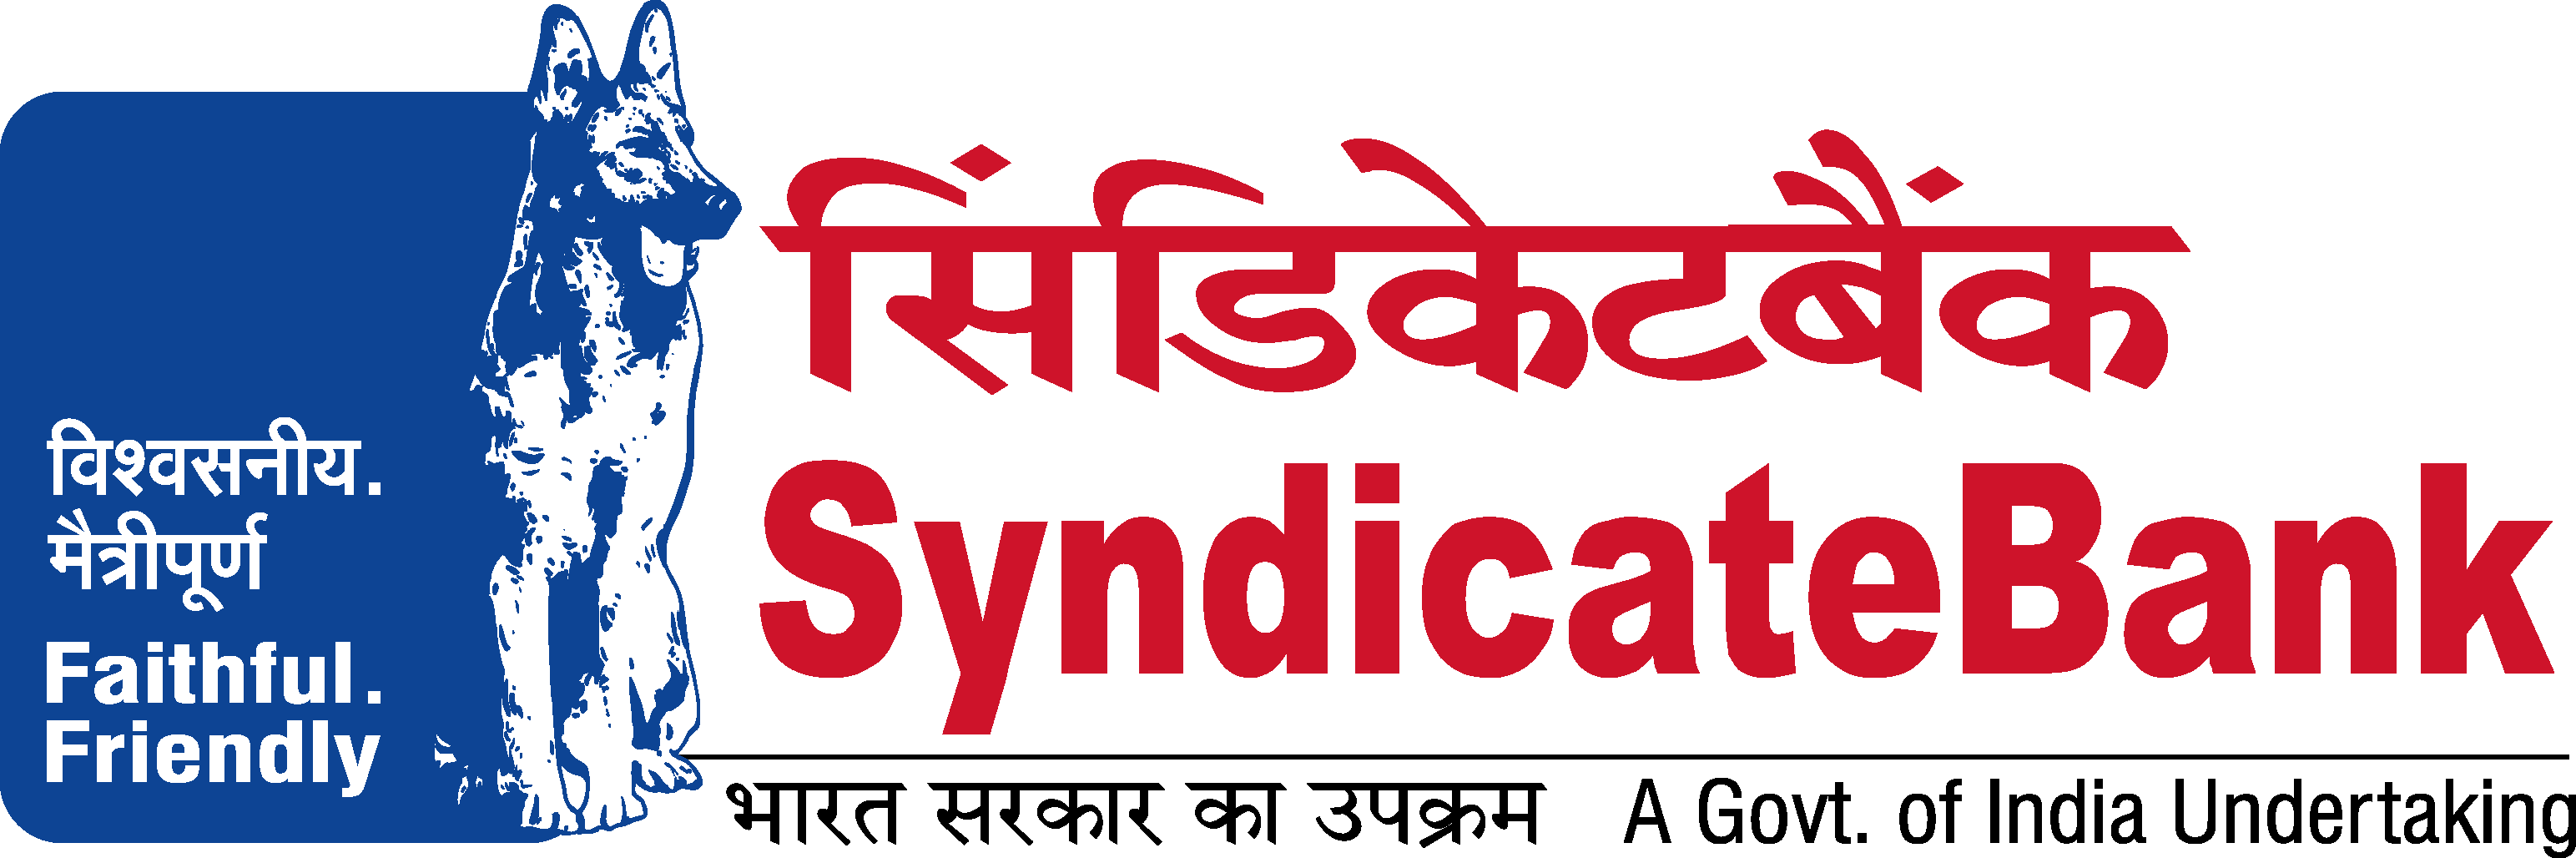 Syndicate Bank Logo Png Syndicate Bank Logo Vector Clipart Large Size Png Image Pikpng